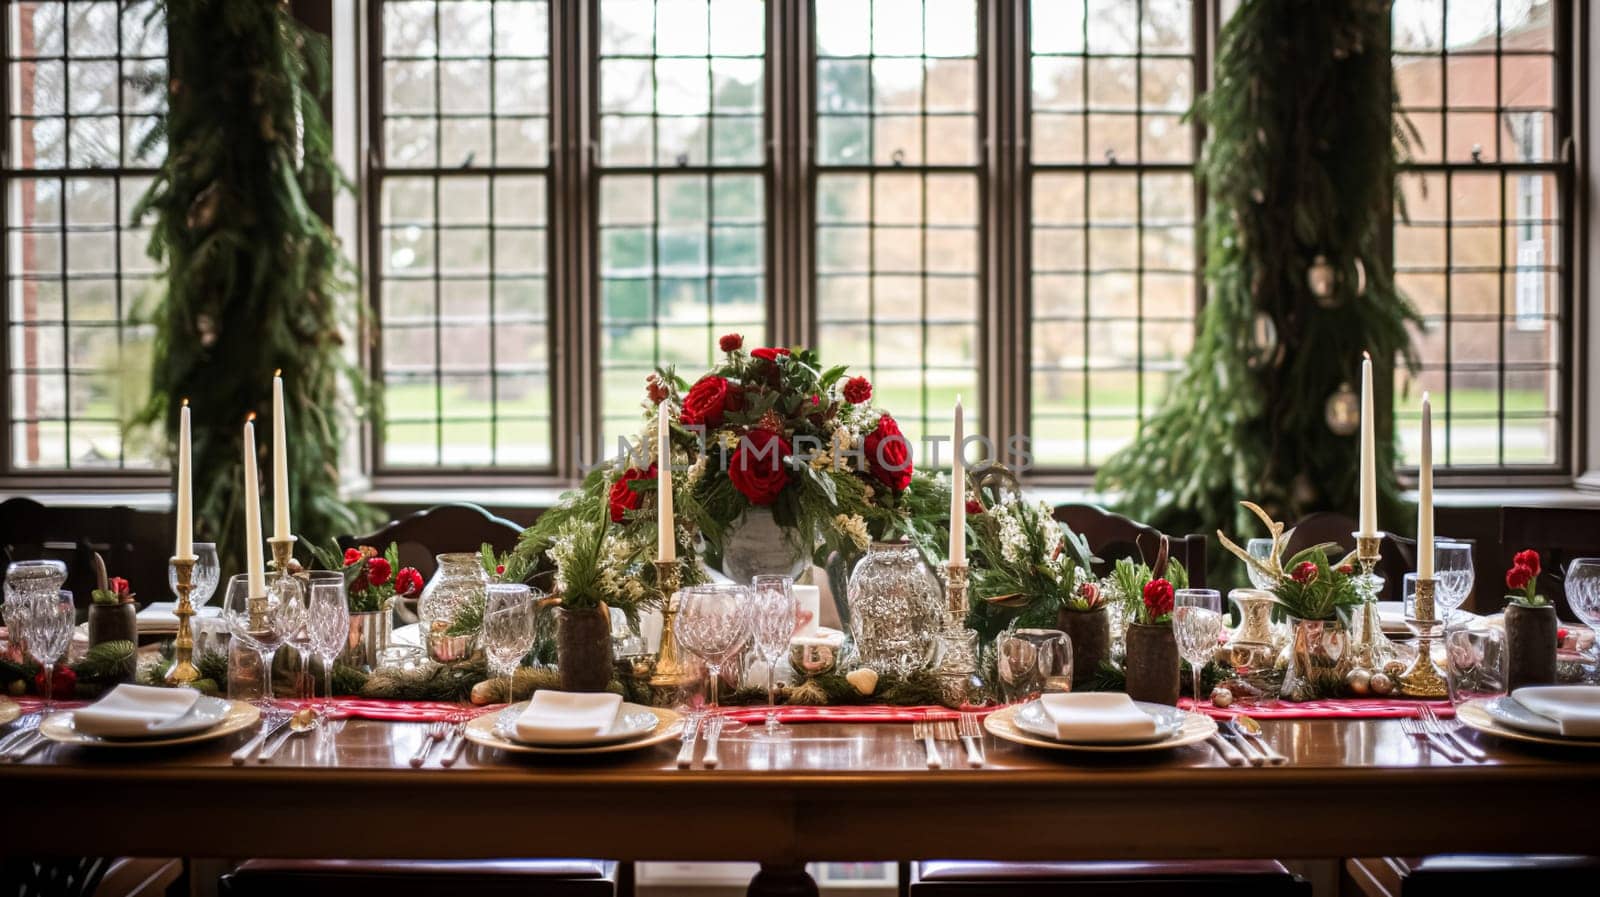 Christmas at the manor, holiday tablescape and dinner table setting, English countryside decoration and festive interior decor